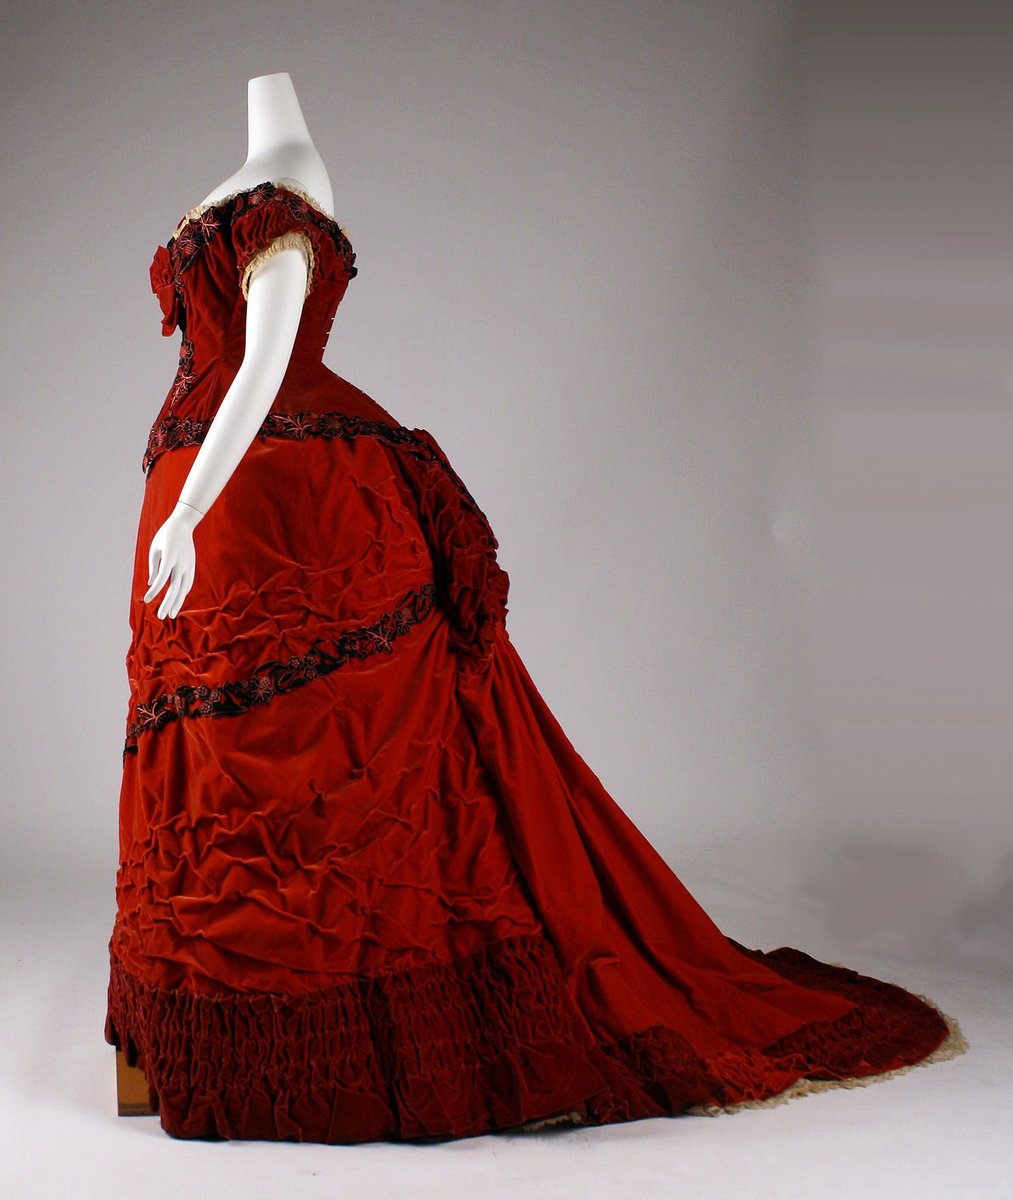 The bustle later evolved into a much more pronounced humped shape on the back of the skirt immediately below the waist, with the fabric of the skirts falling quite sharply to the floor, changing the shape of the silhouette.